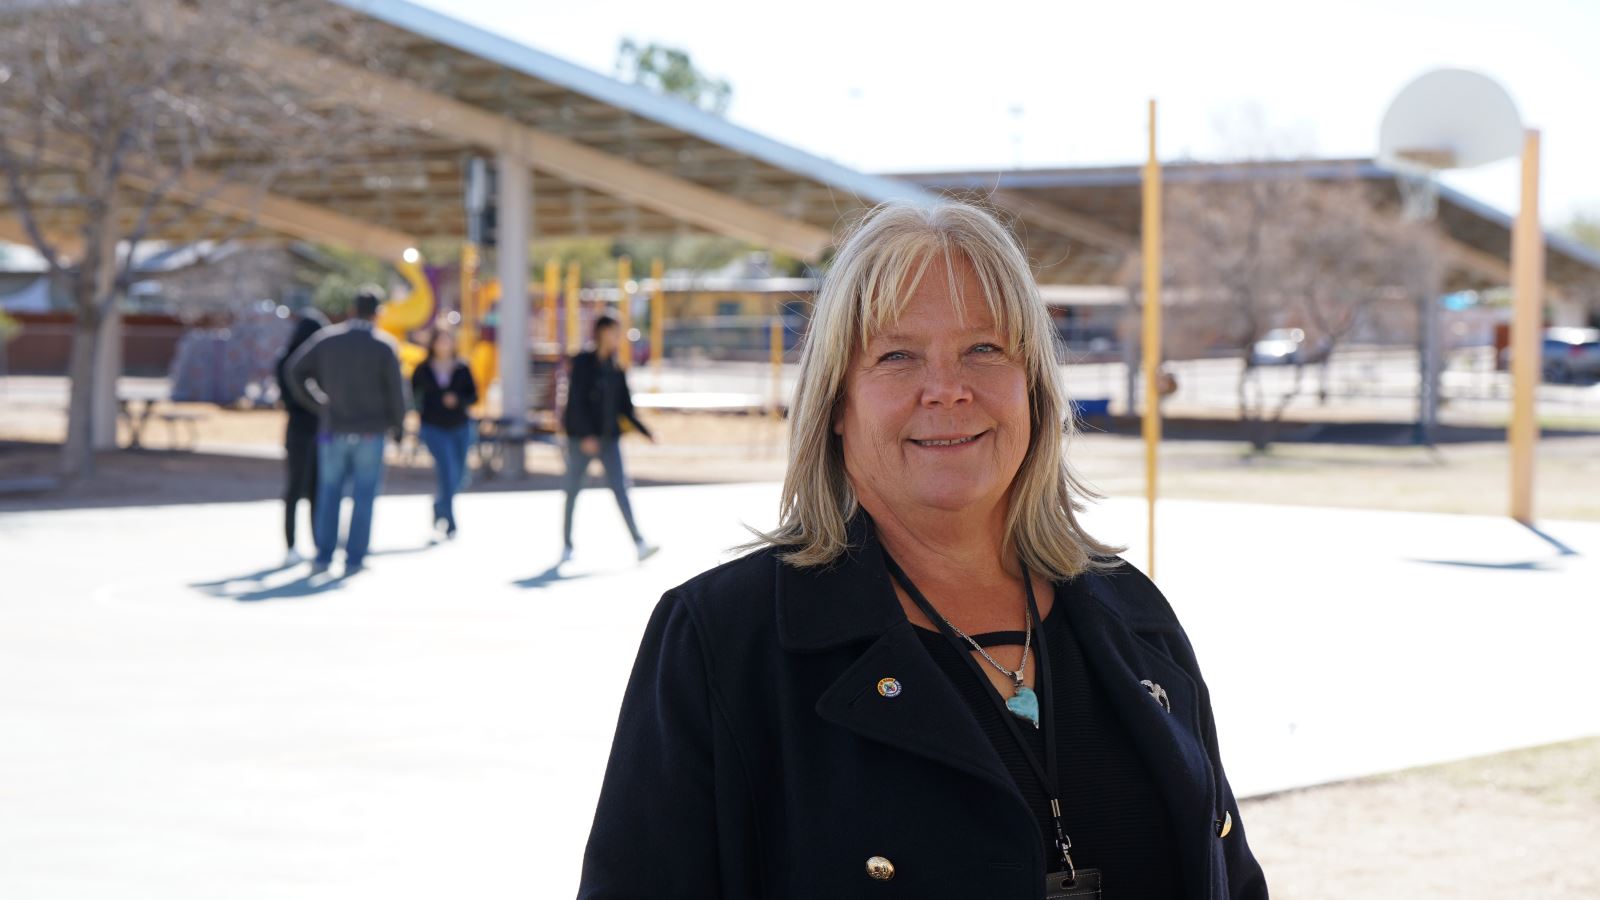 Tina Cook, TUSD's energy project manager, smiles in front of some solar parking structures.